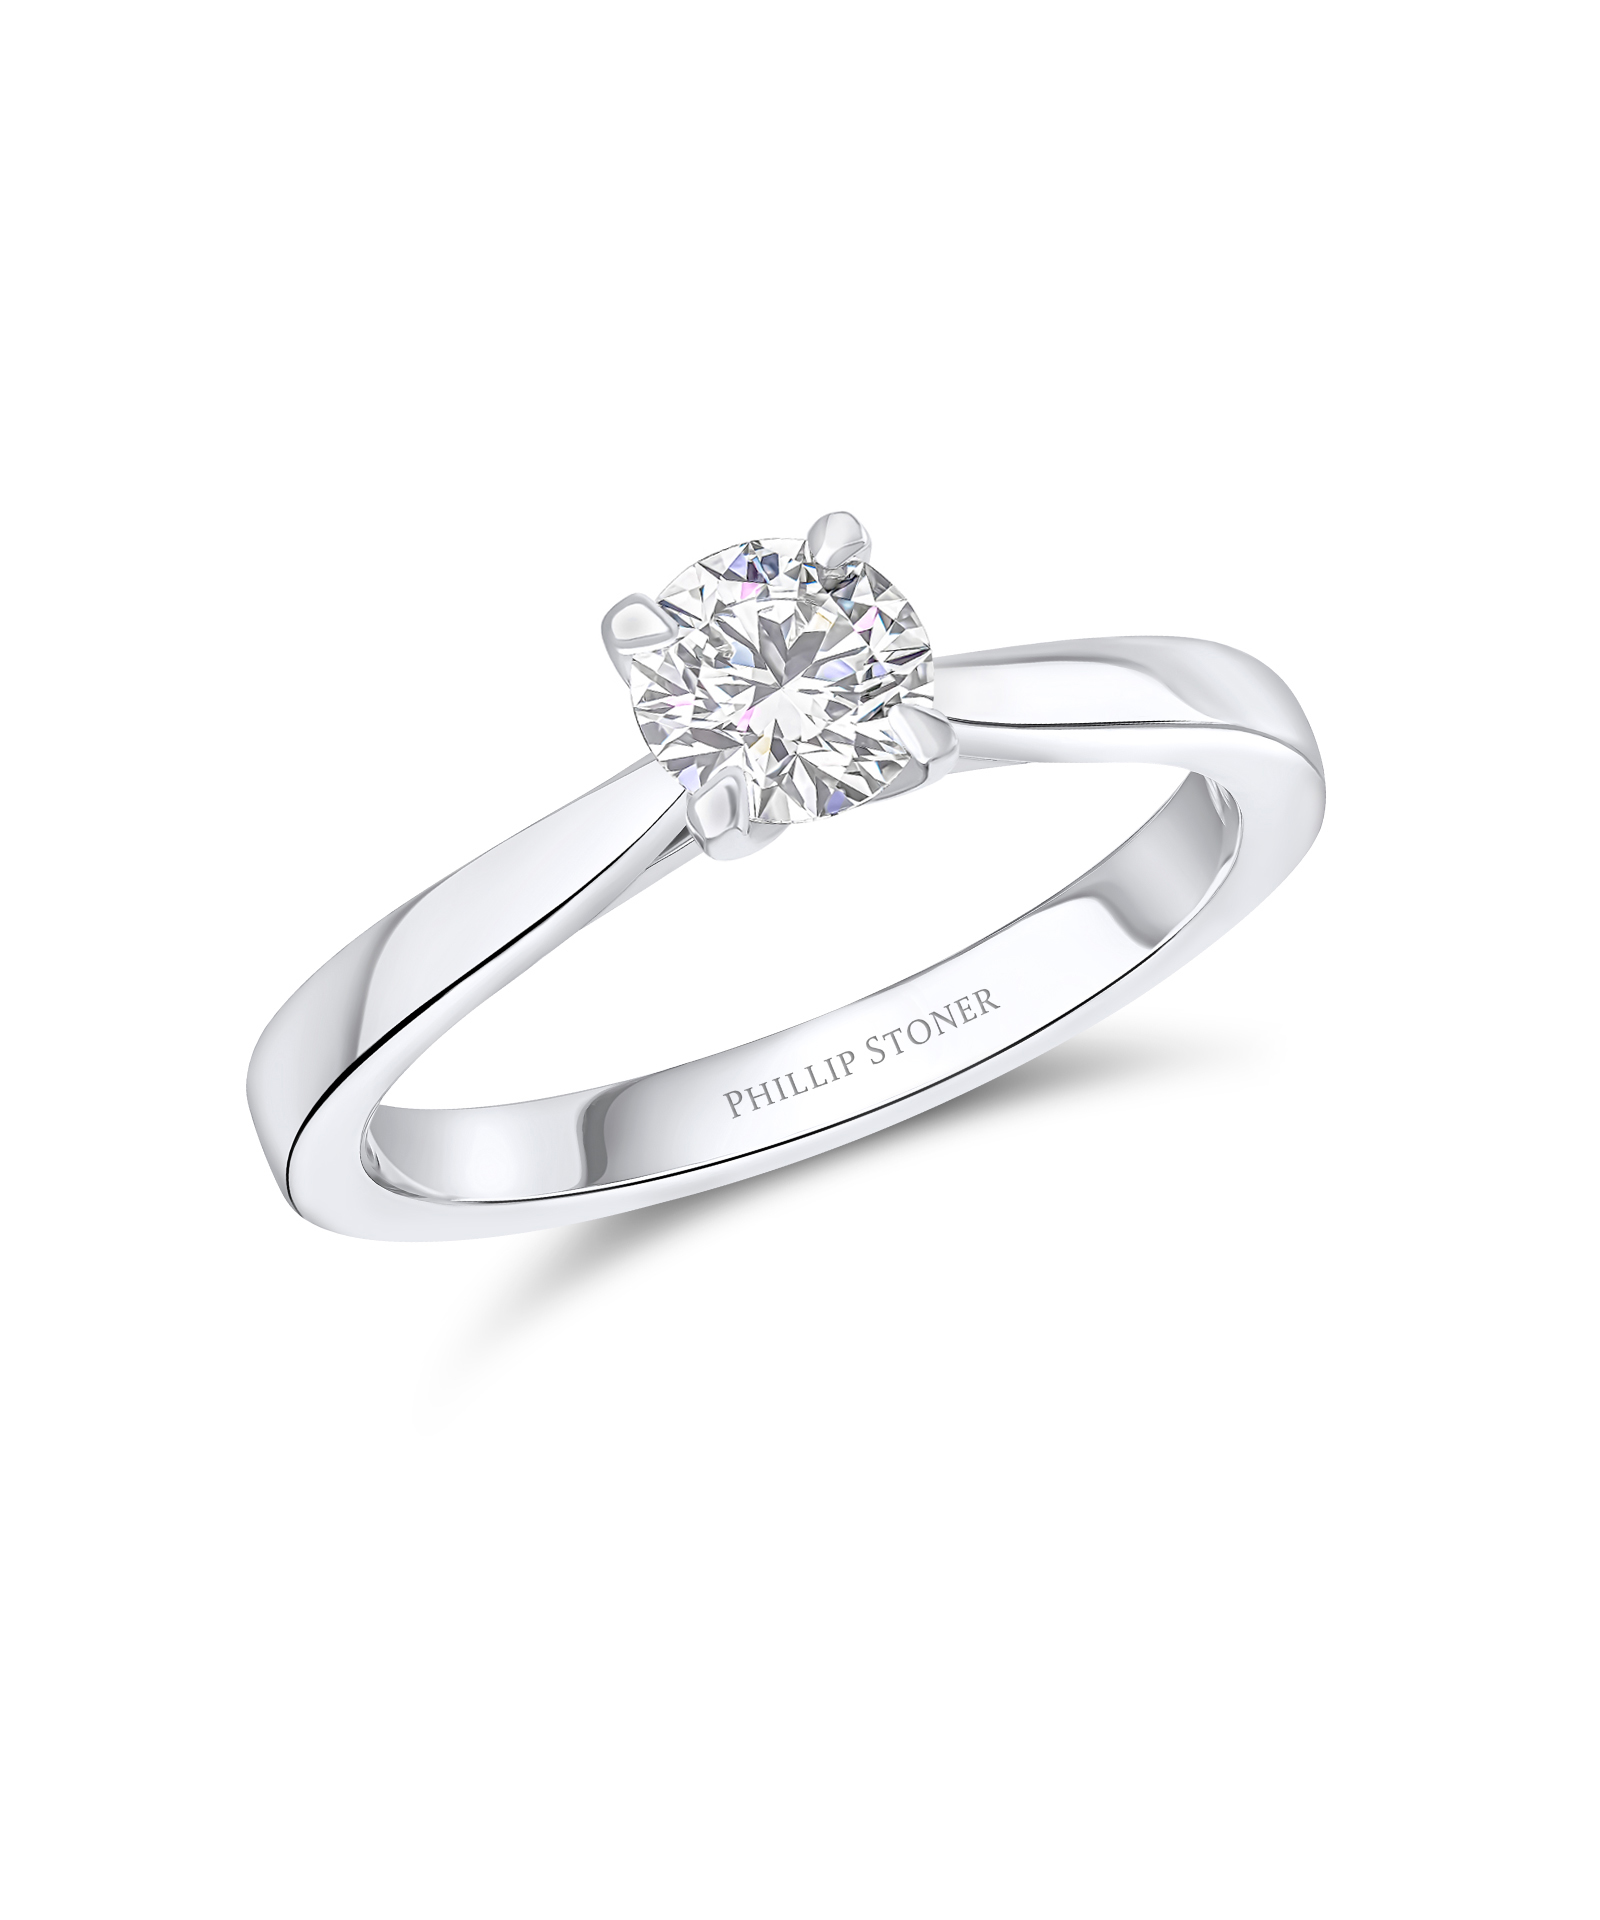 0.50ct Round Brilliant Cut Diamond Ring with Cathedral Setting - Phillip Stoner The Jeweller